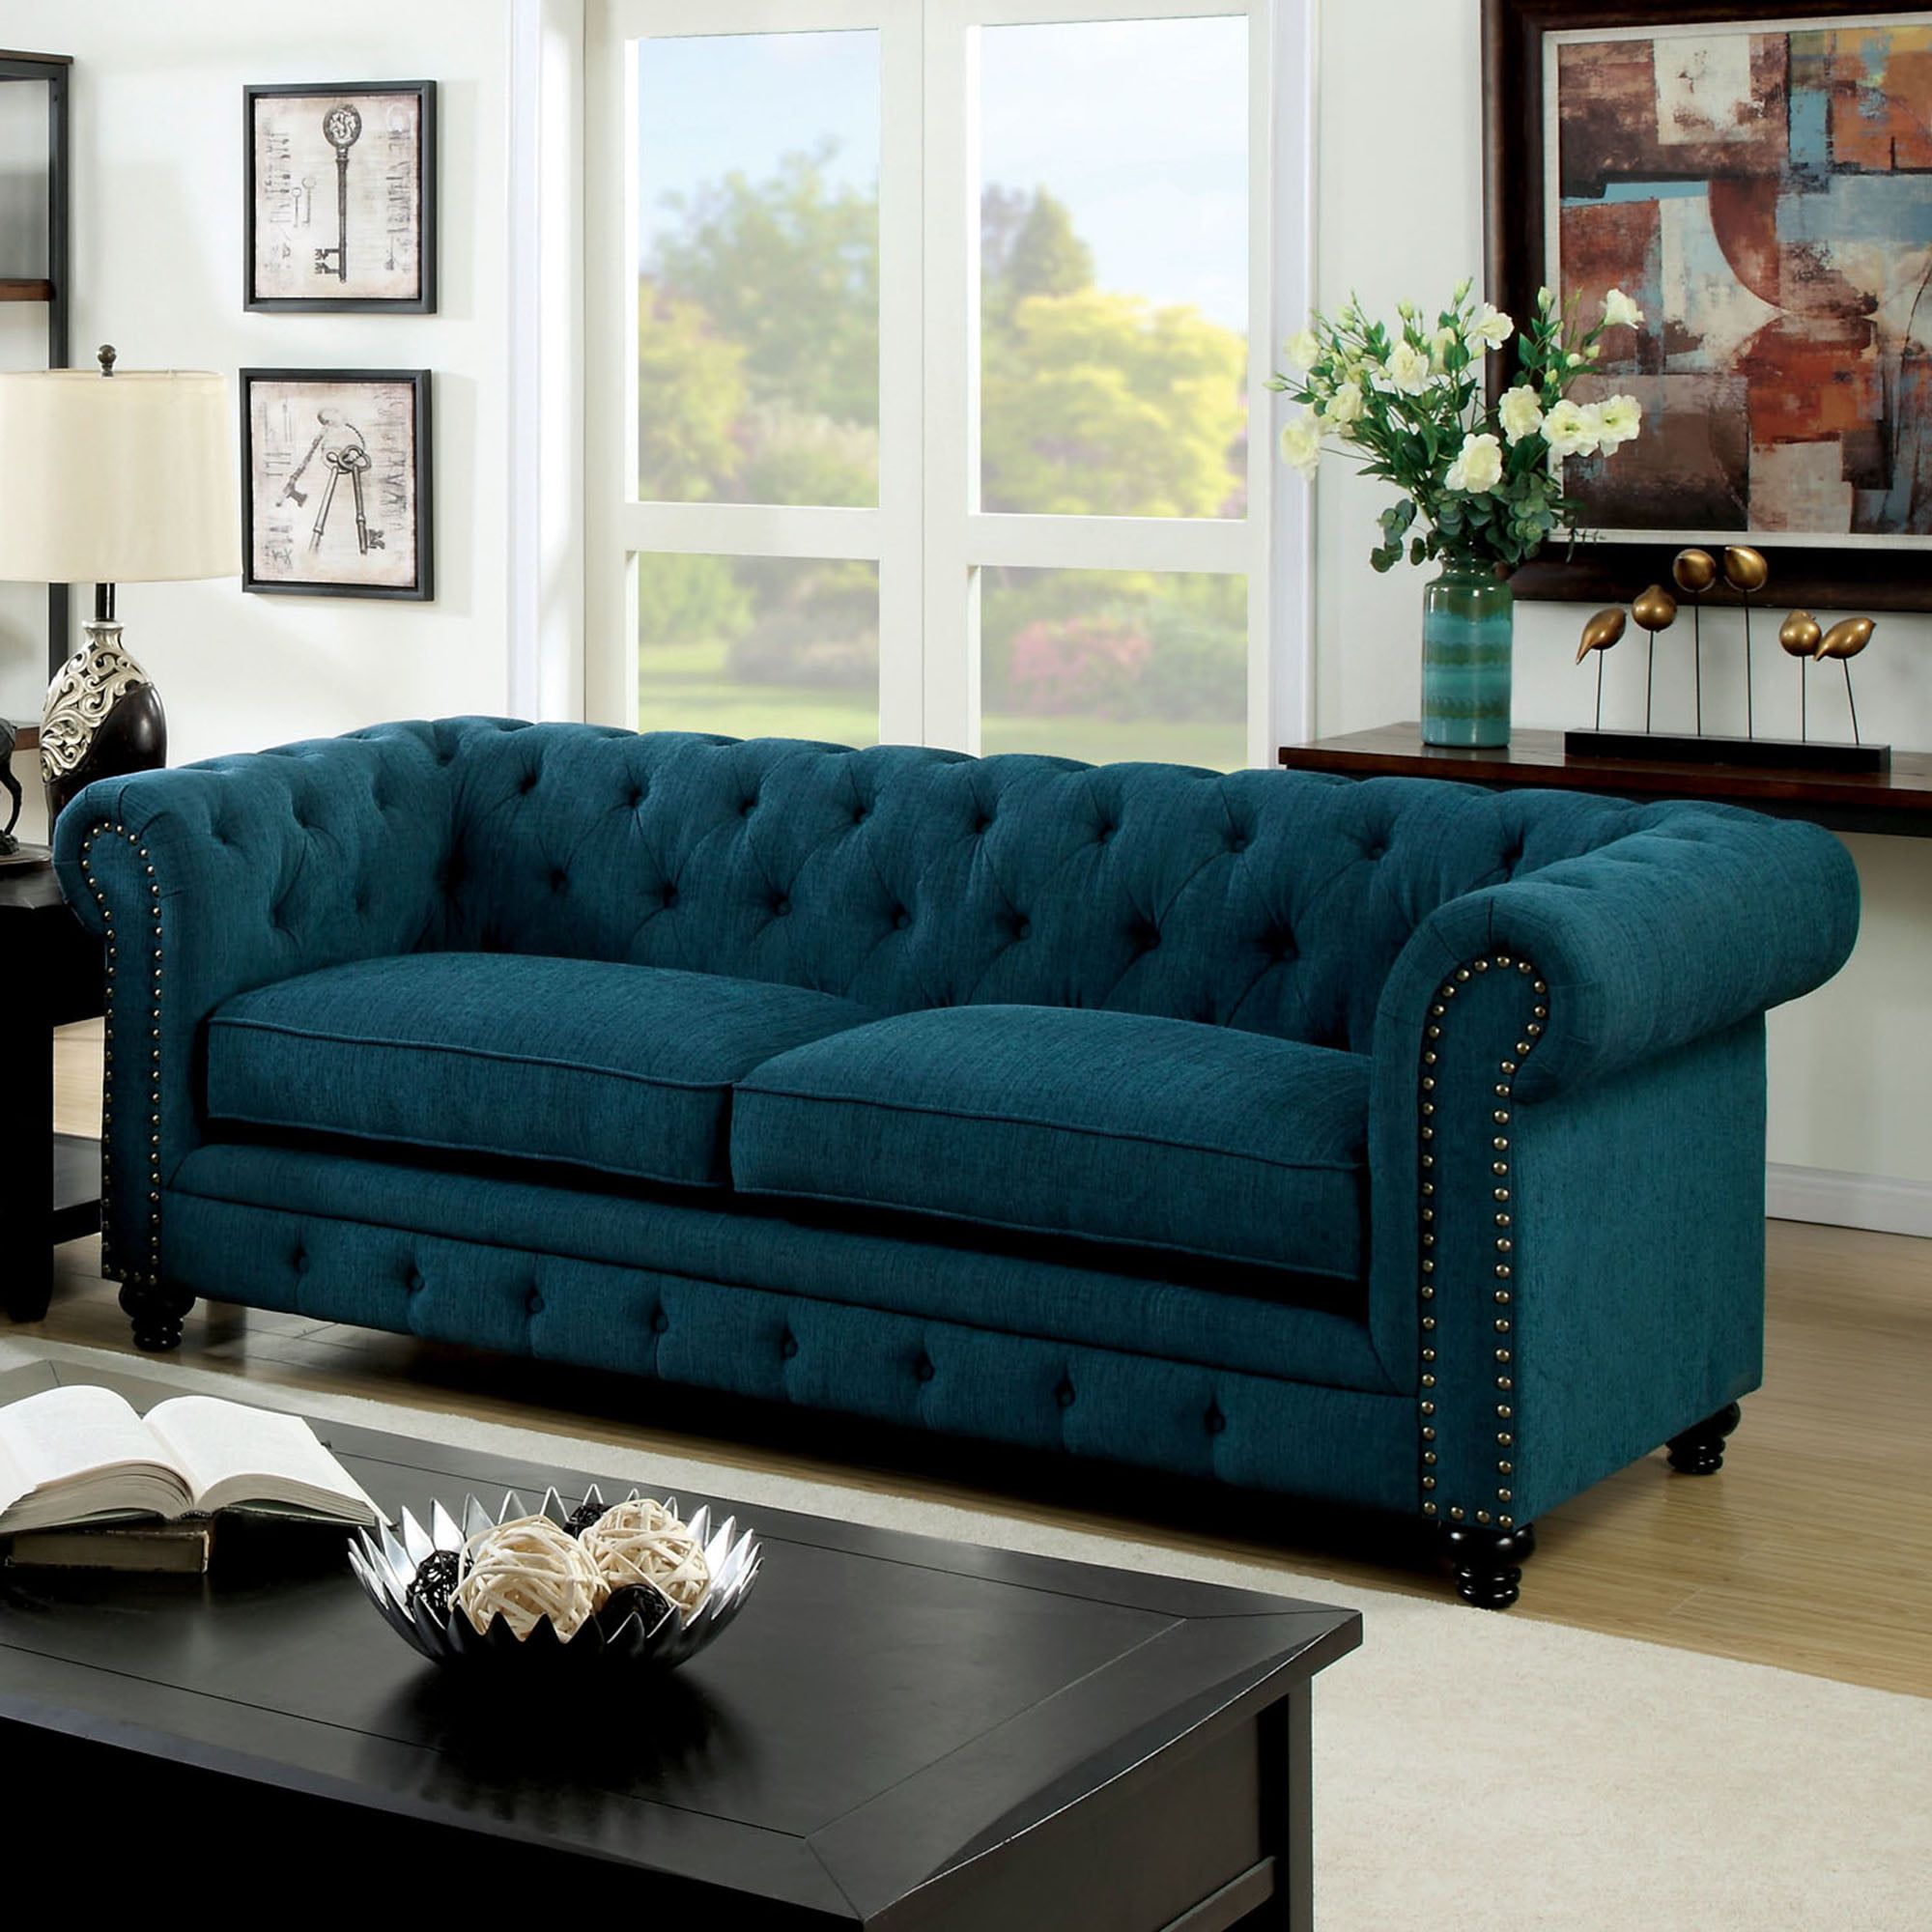 Furniture Of America Tufted Glam Faux Leather Nyssa Tuxedo Sofa, Dark Within Tufted Upholstered Sofas (View 16 of 20)